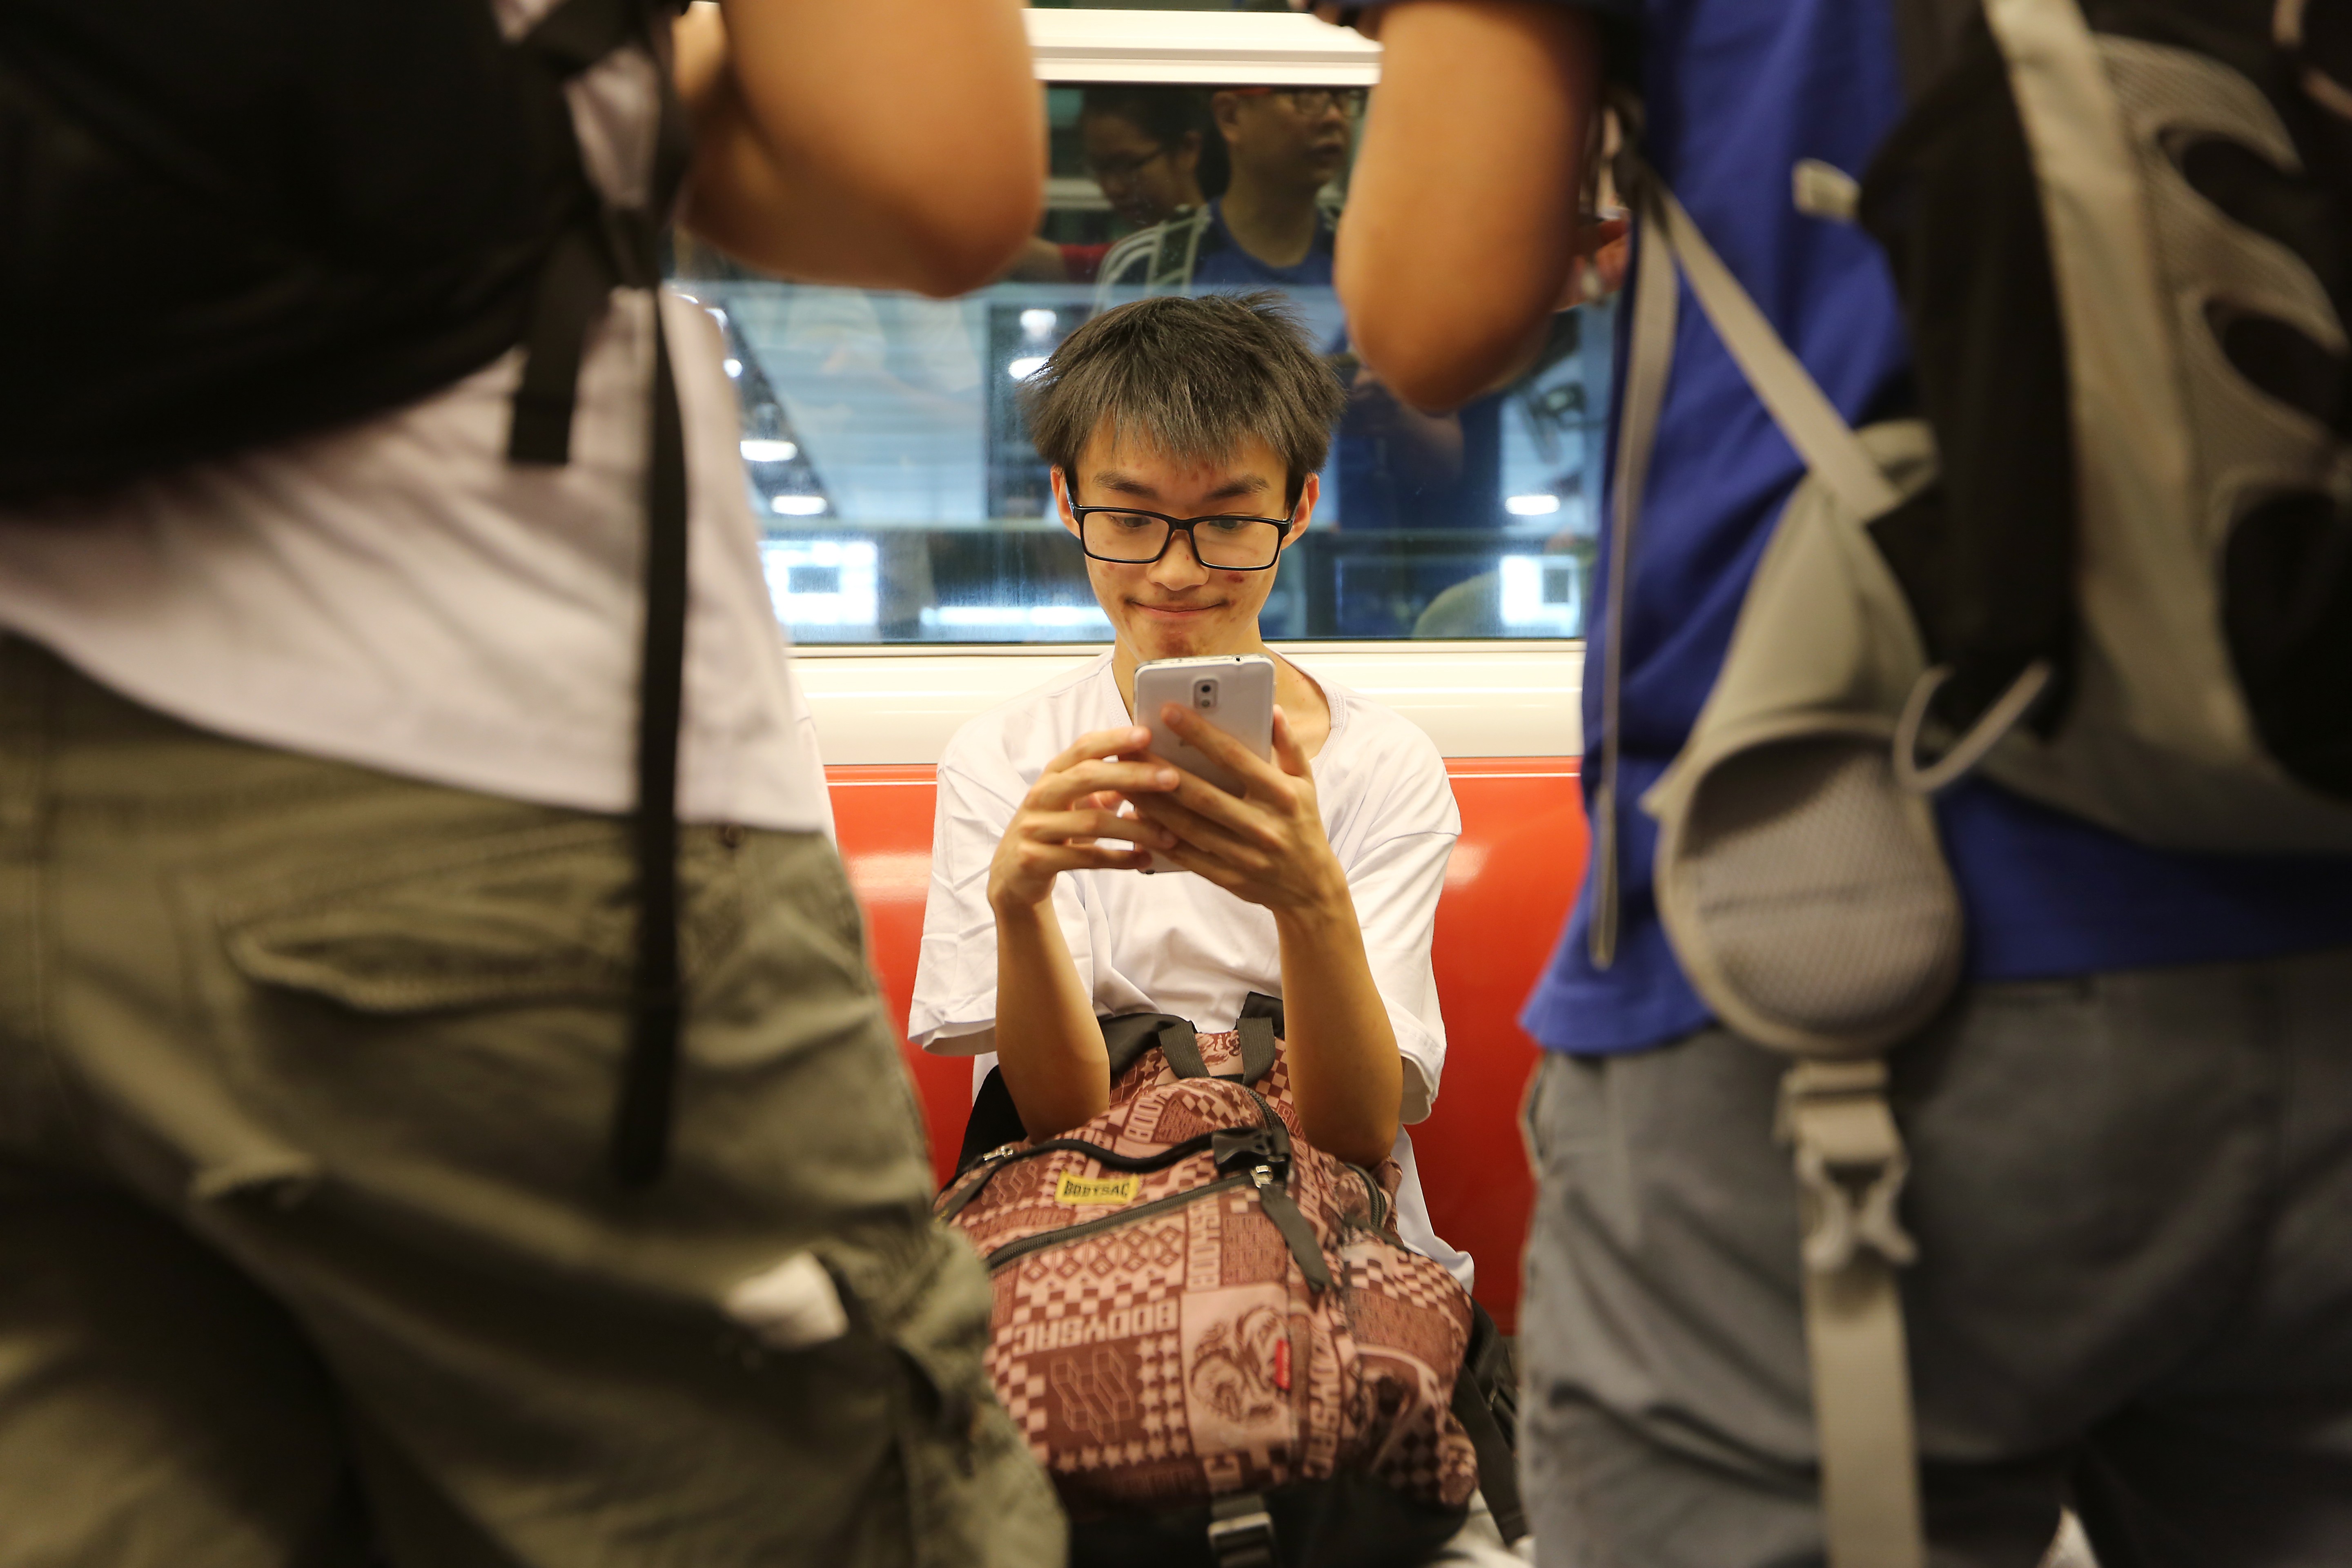 Internet advertising spending is rising sharply in Hong Kong, particularly on content streamed by mobile, but TV spend is flagging, according to a new study on the market. Photo: SCMP